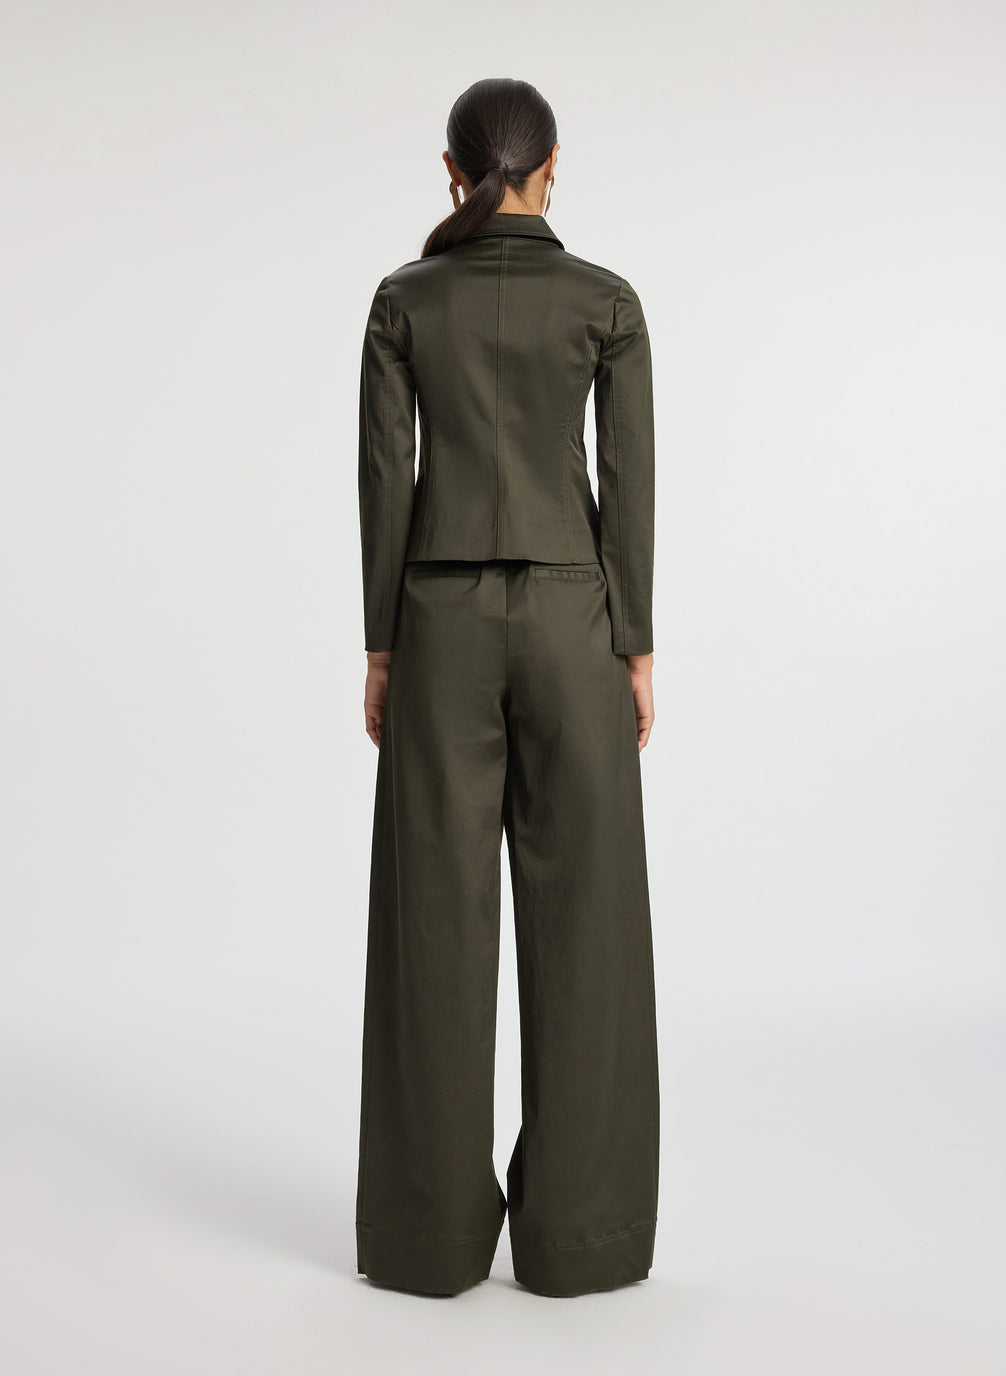 back view of woman in olive green sateen suit jacket and wide leg pants